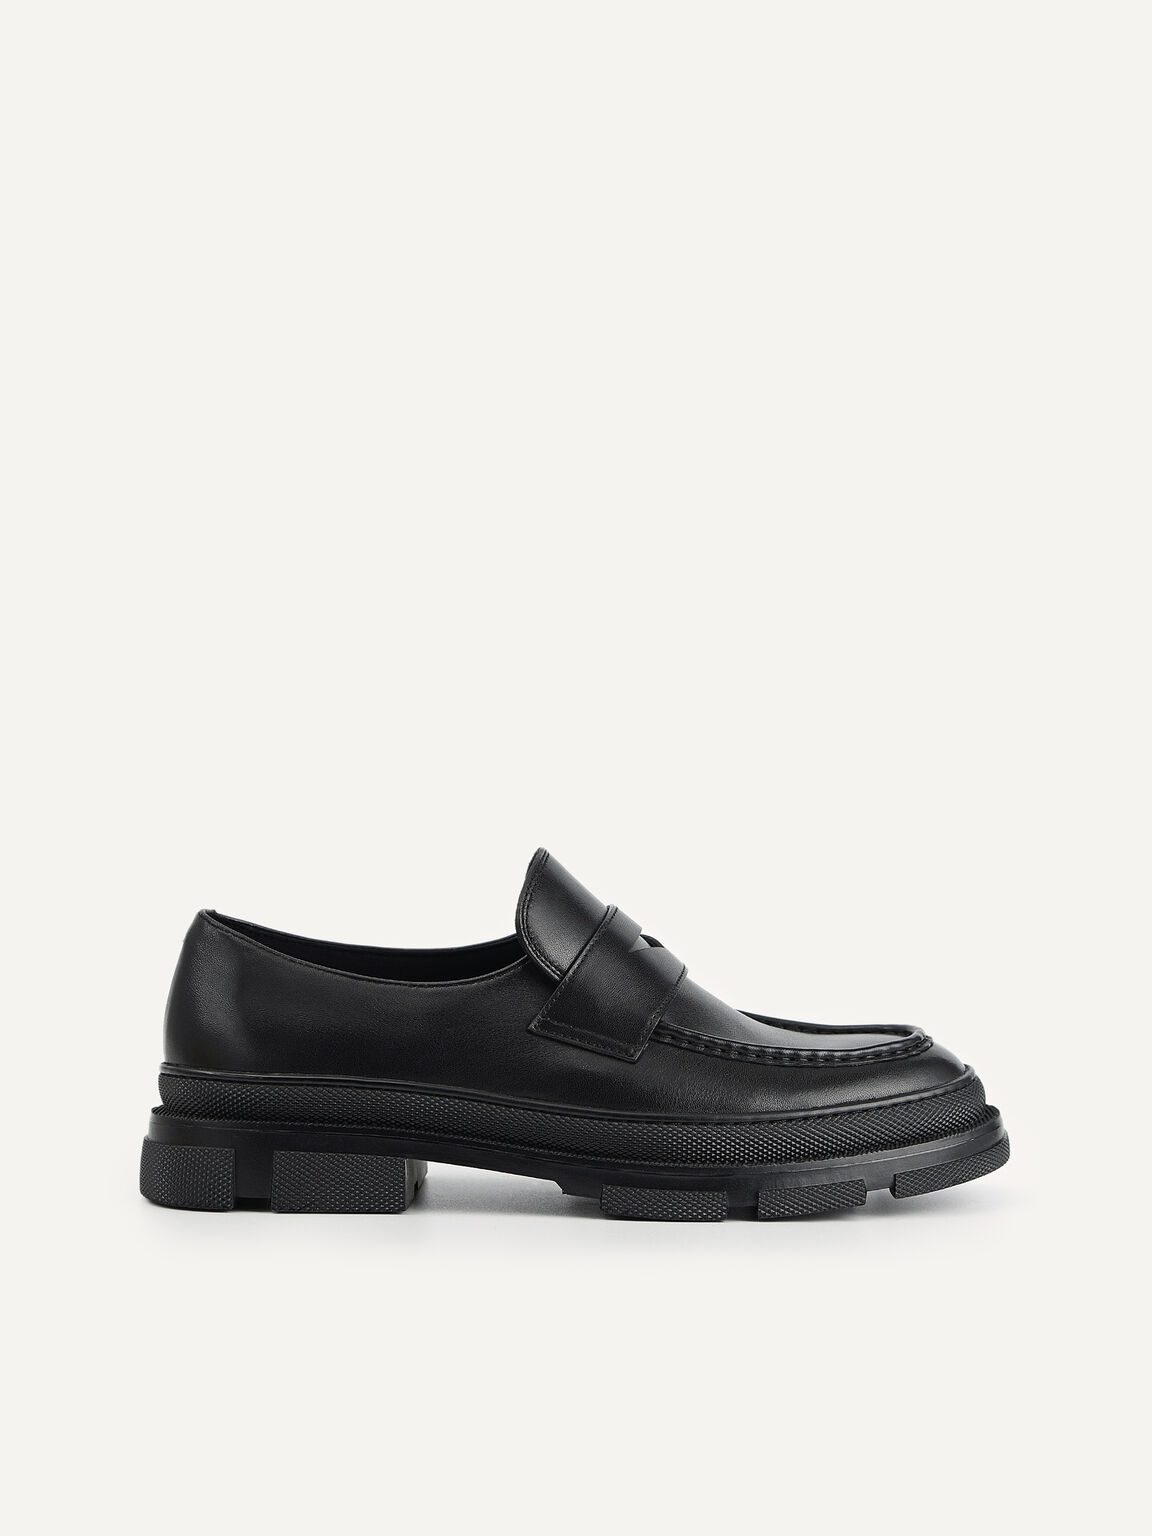 Chunky Leather Loafers, Black